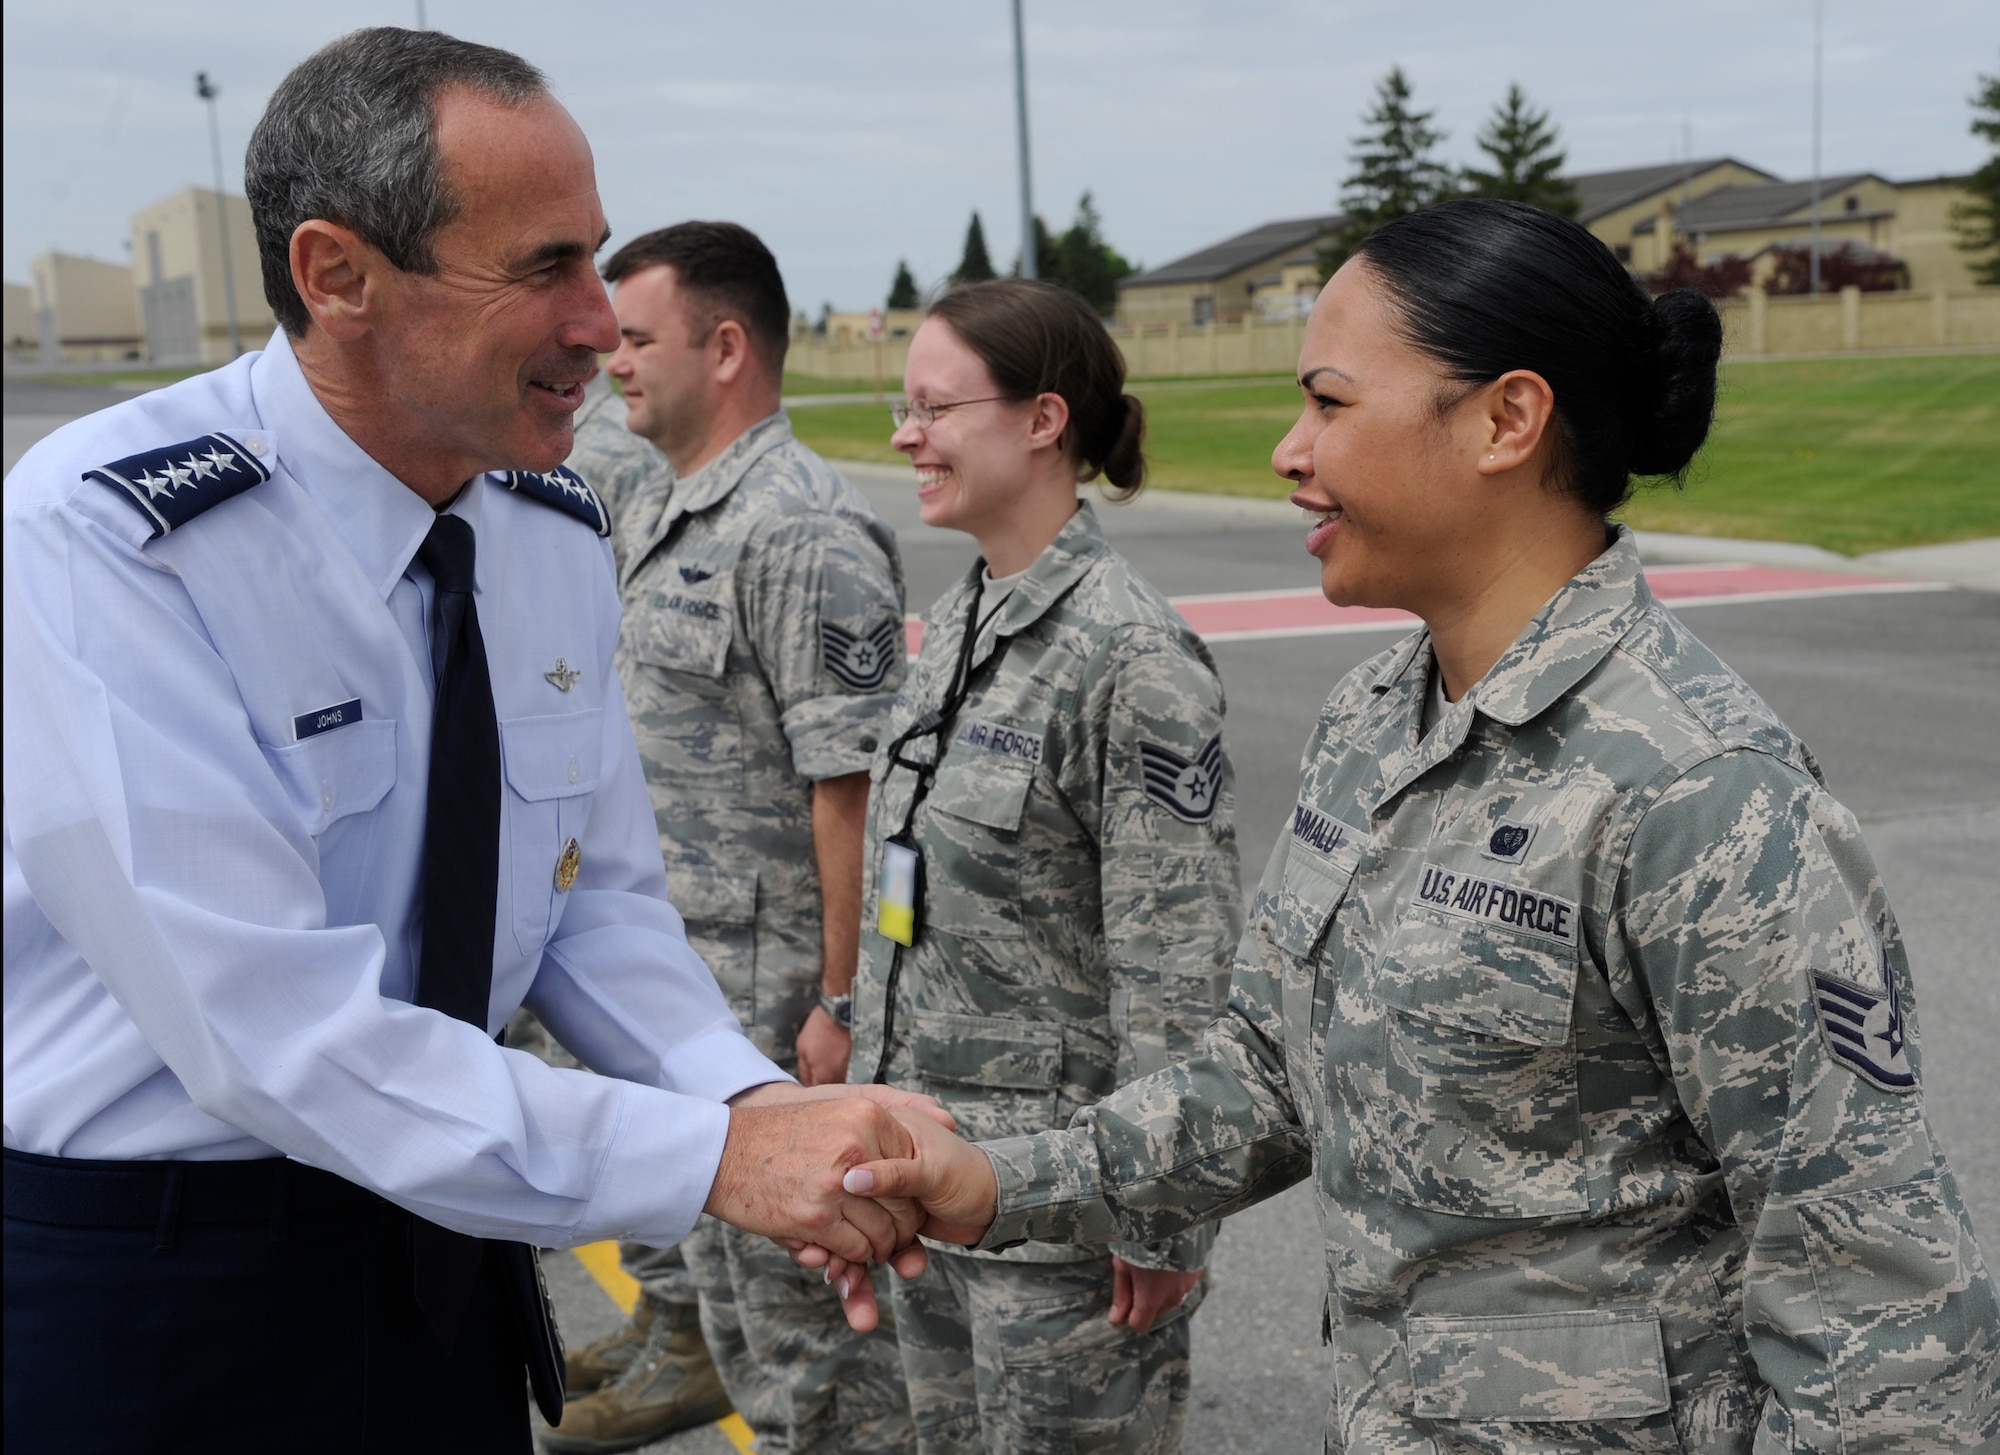 Gen. Raymond Johns, Jr., Air Mobility Command commander, greets Staff Sgt. Katelina Tiumalu, 92nd Air Refueling Wing protocol NCO in charge, during a recent visit to Fairchild Air Force Base, Wash., May 20, 2012. If something needs to be done, whether it’s picking up trash, pitching luggage or washing vehicles and someone else hasn't done their job, then the wing’s protocol office is there getting the mission done. (U.S. Air Force photo by Airman 1st Class Ryan Zeski/Released)